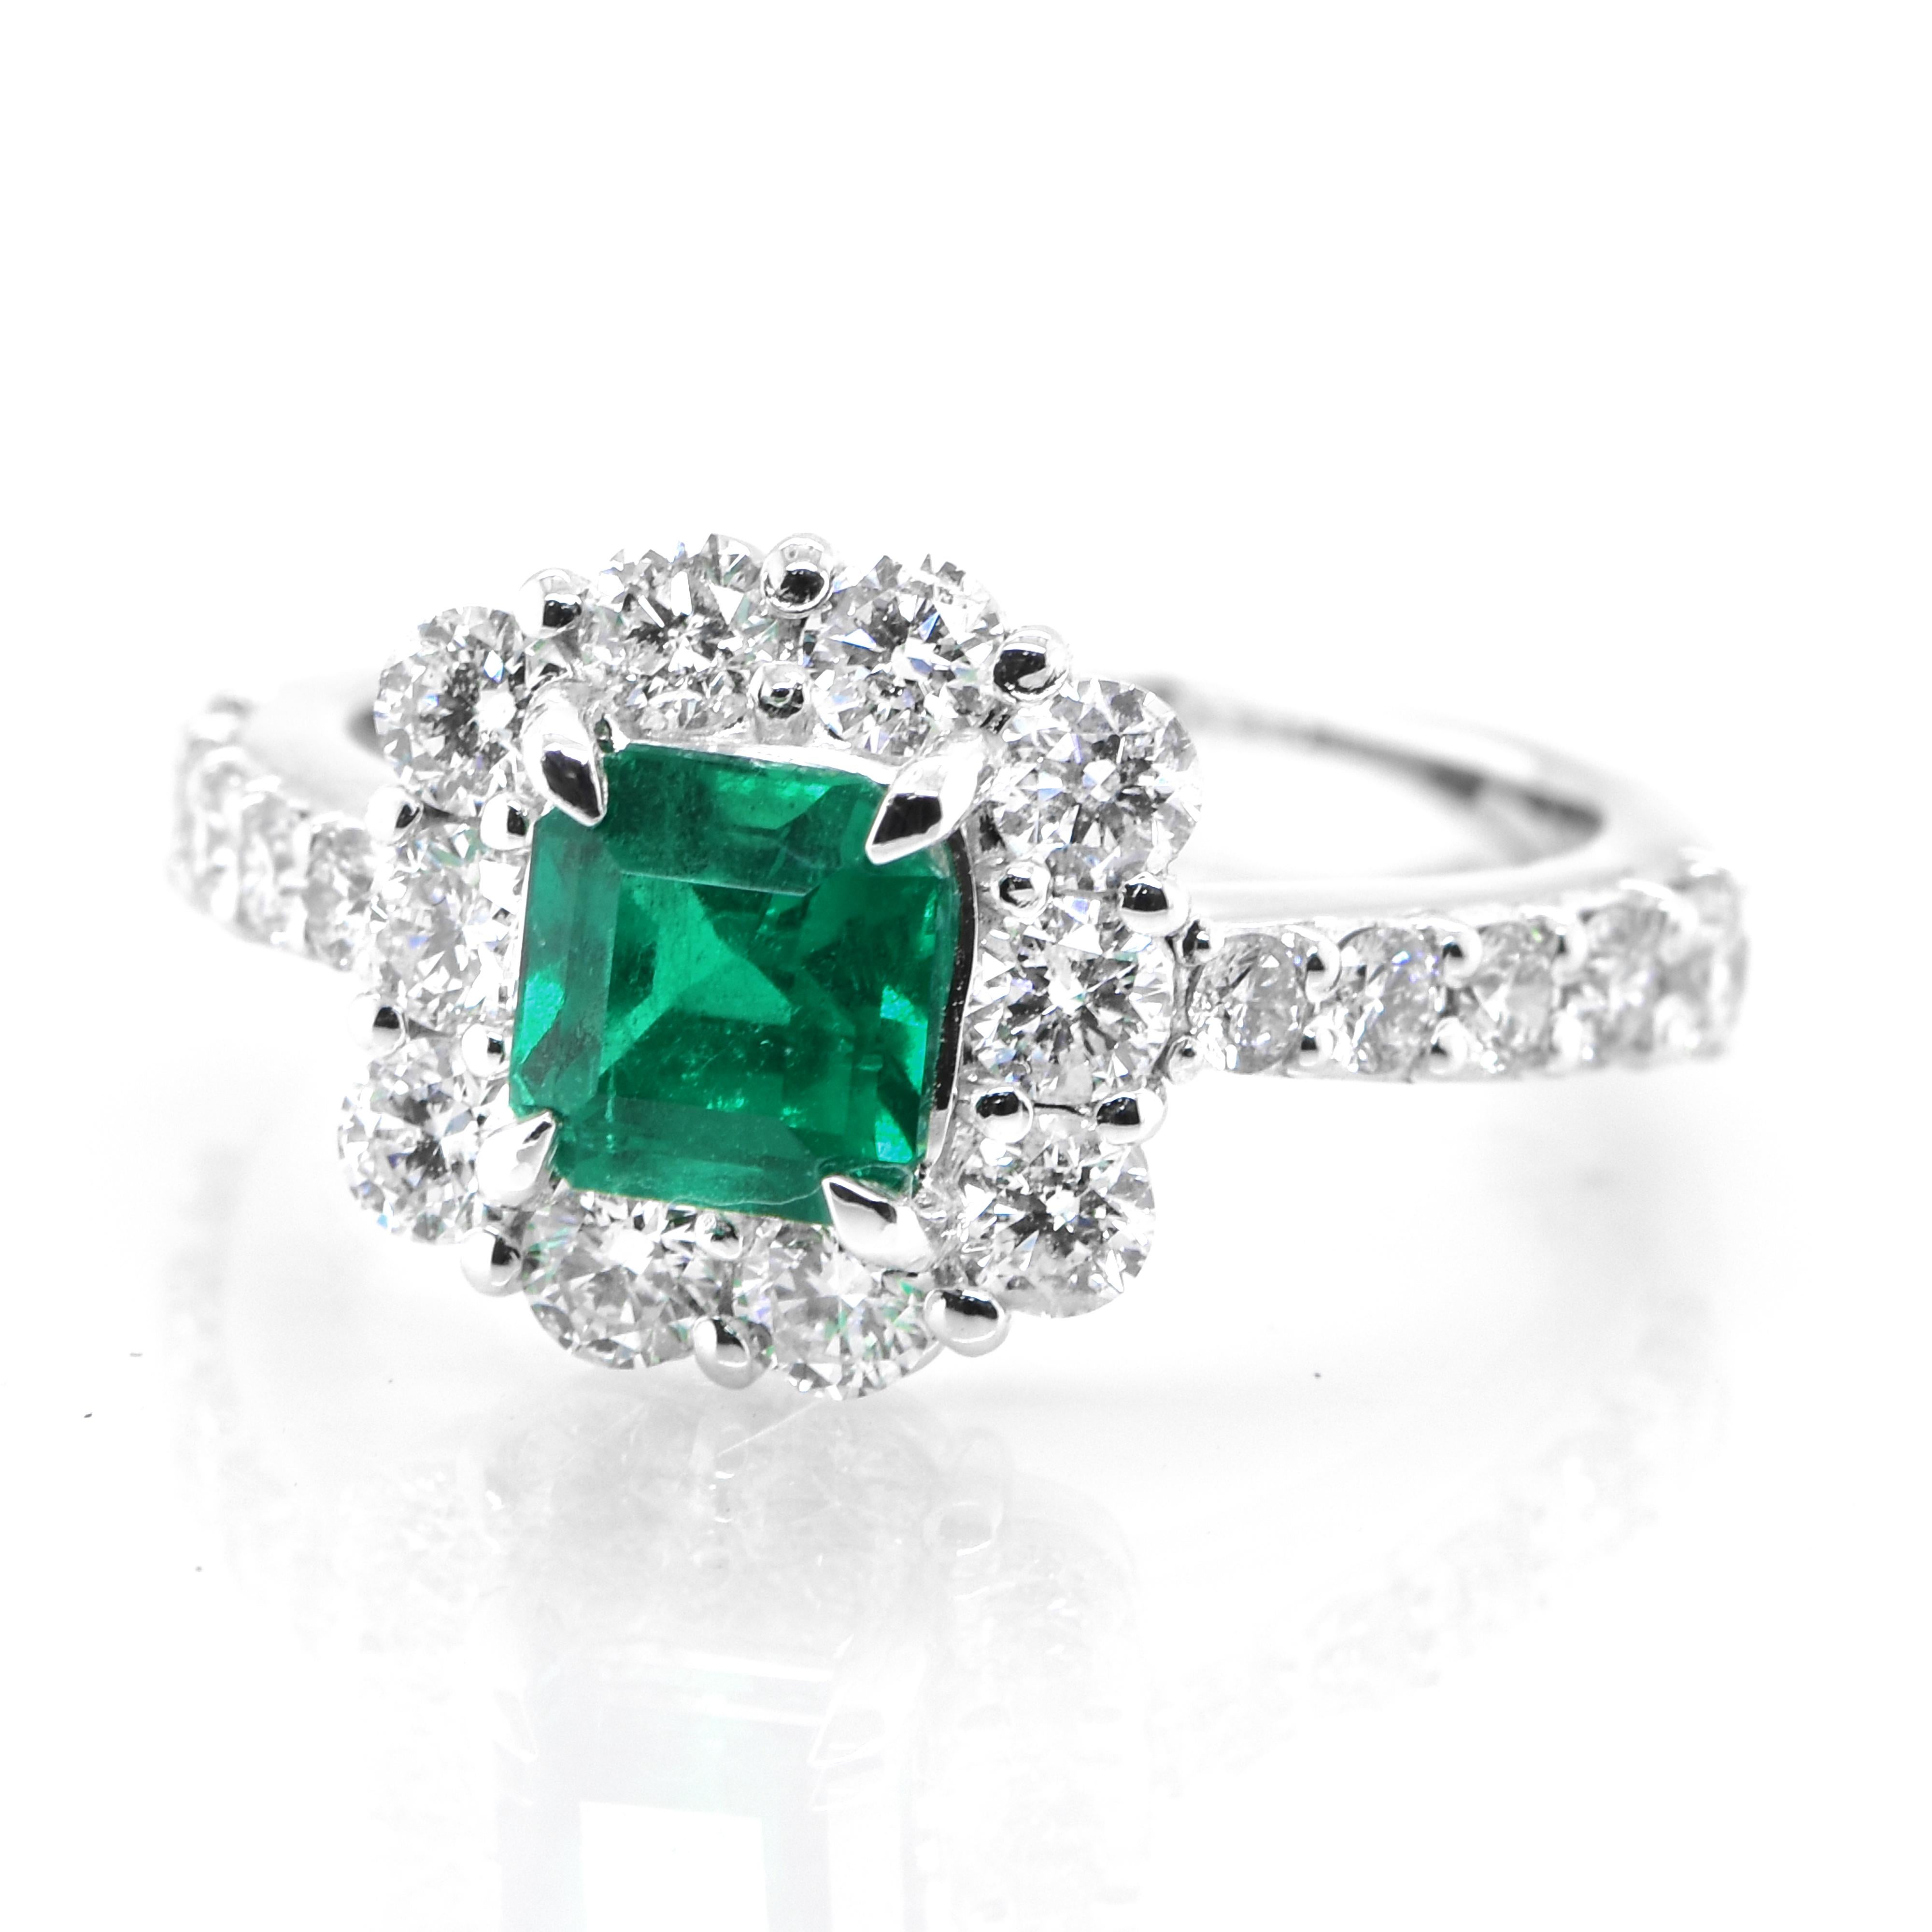 A stunning ring featuring a 0.91 Carat Natural Emerald and 1.13 Carats of Diamond Accents set in Platinum. People have admired emerald’s green for thousands of years. Emeralds have always been associated with the lushest landscapes and the richest